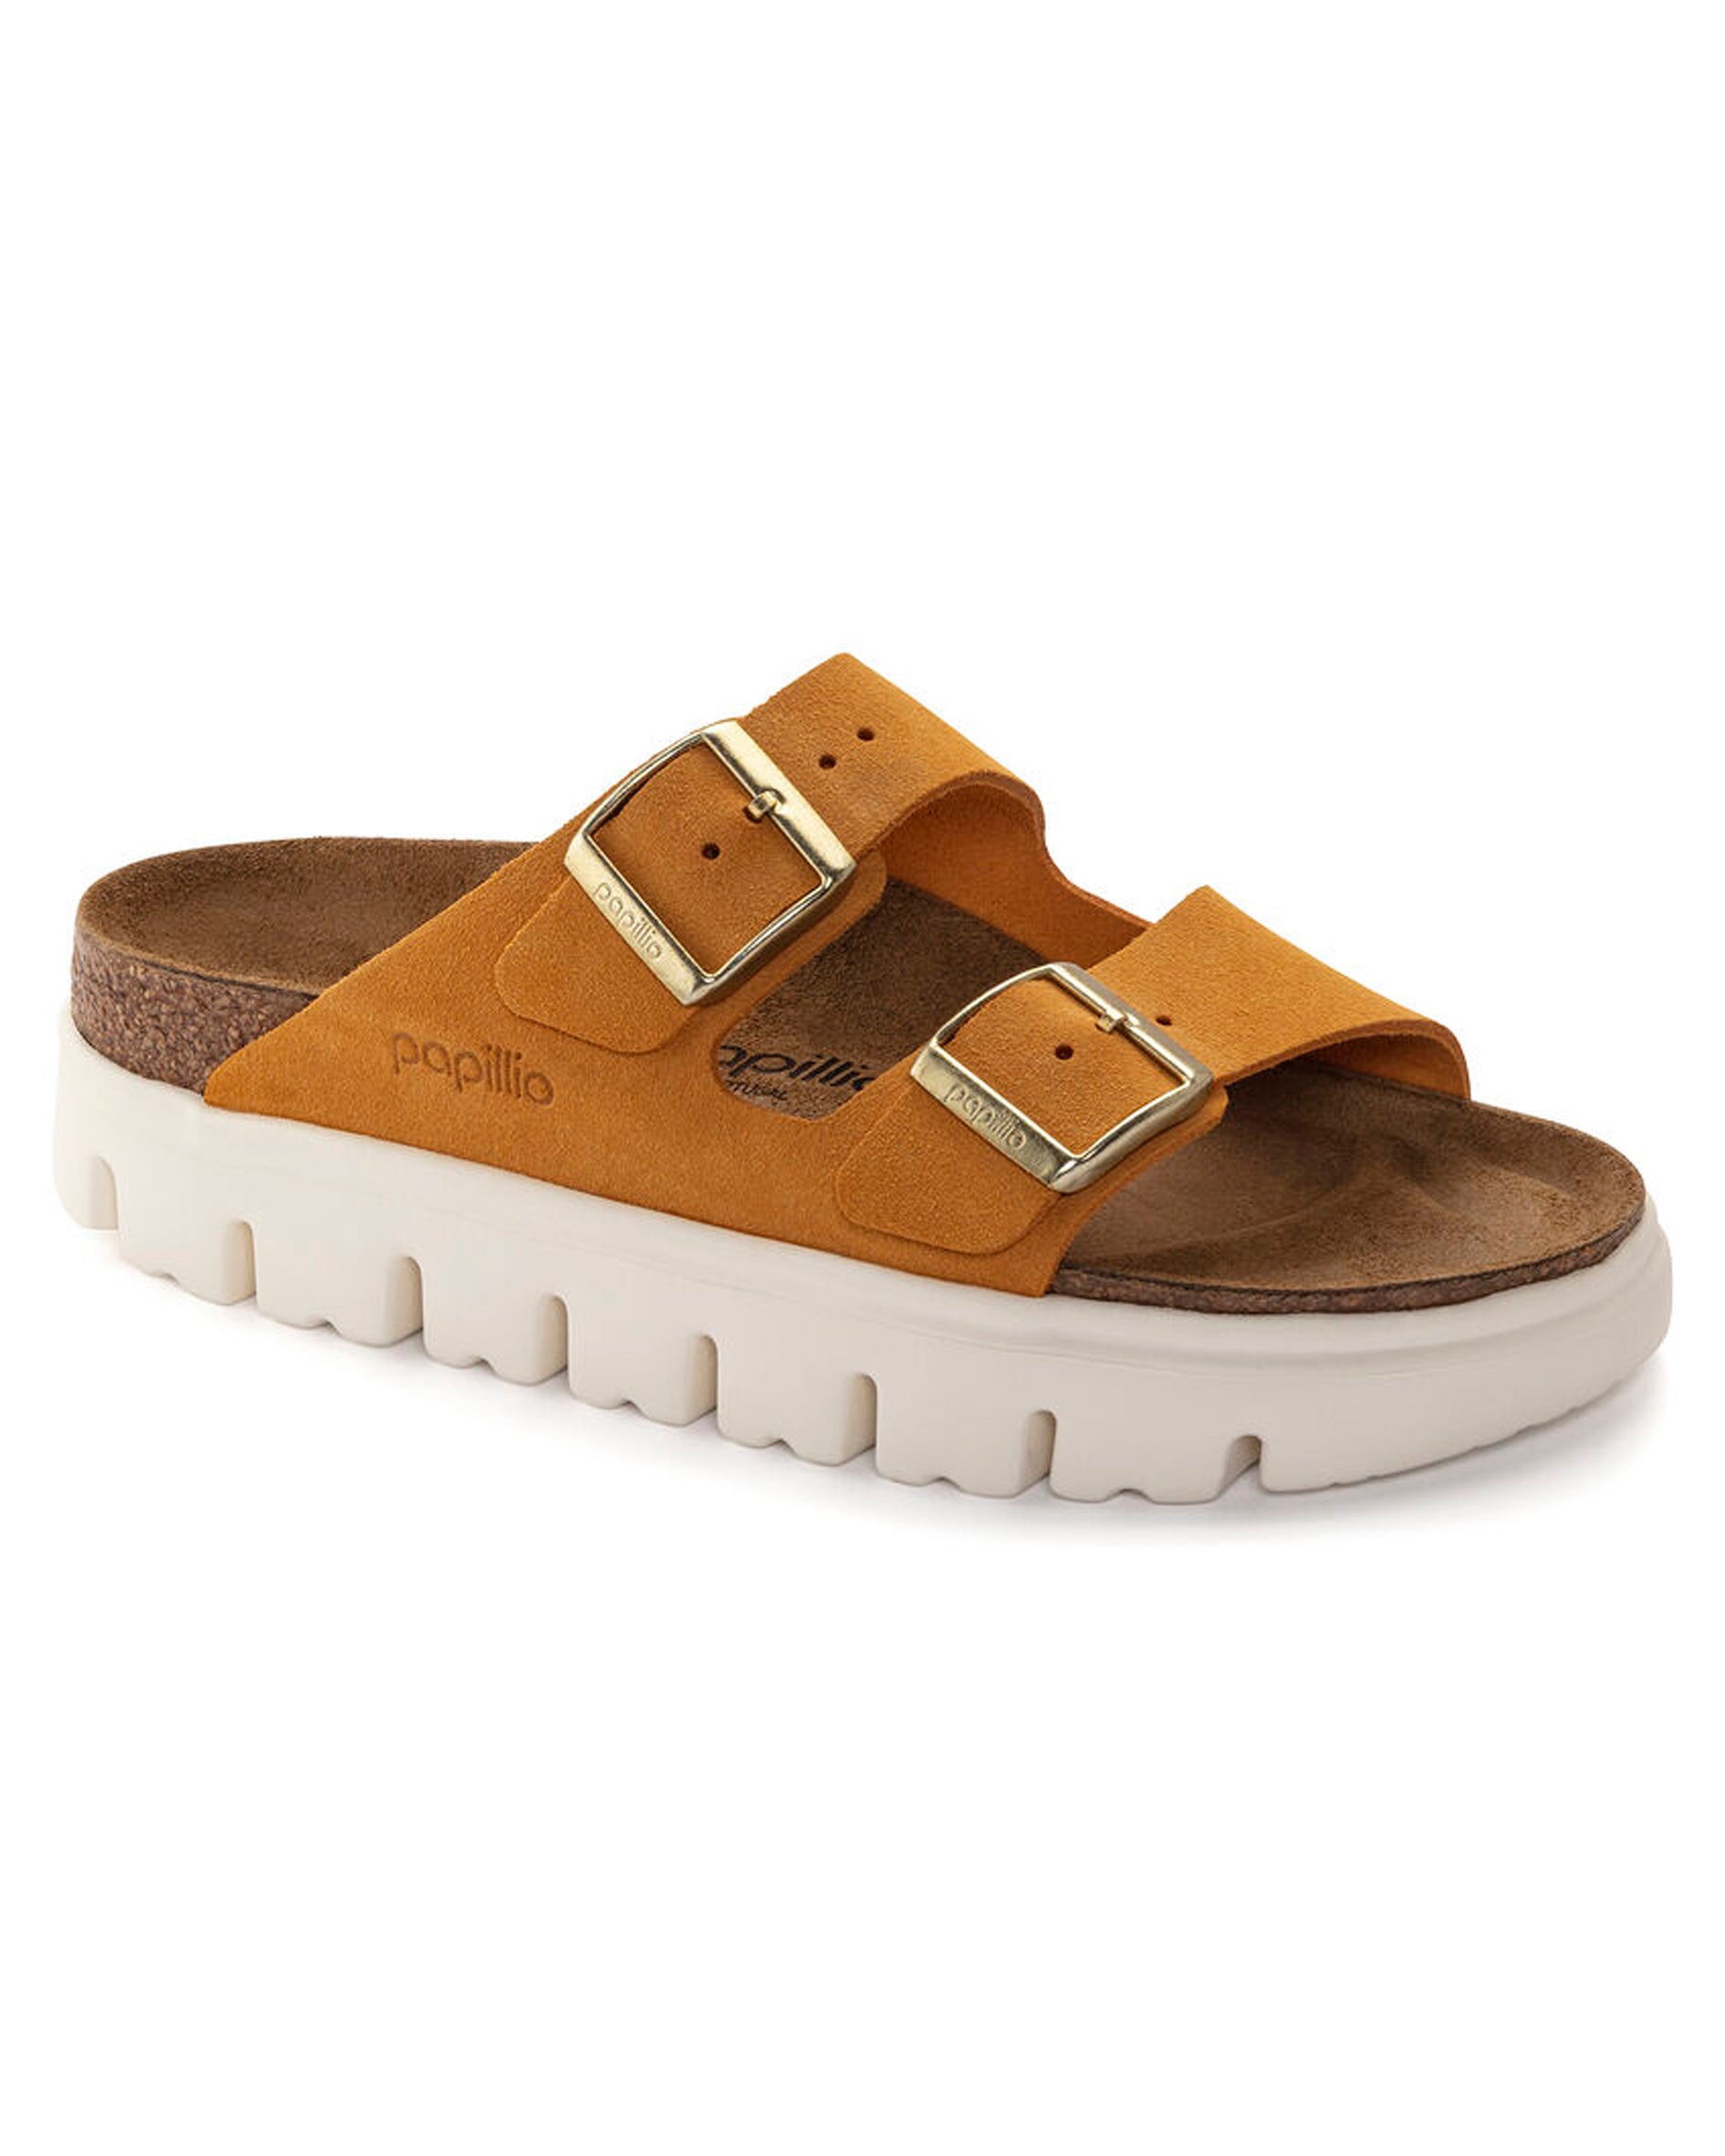 Arizona Chunky Apricot Suede Leather Sandals